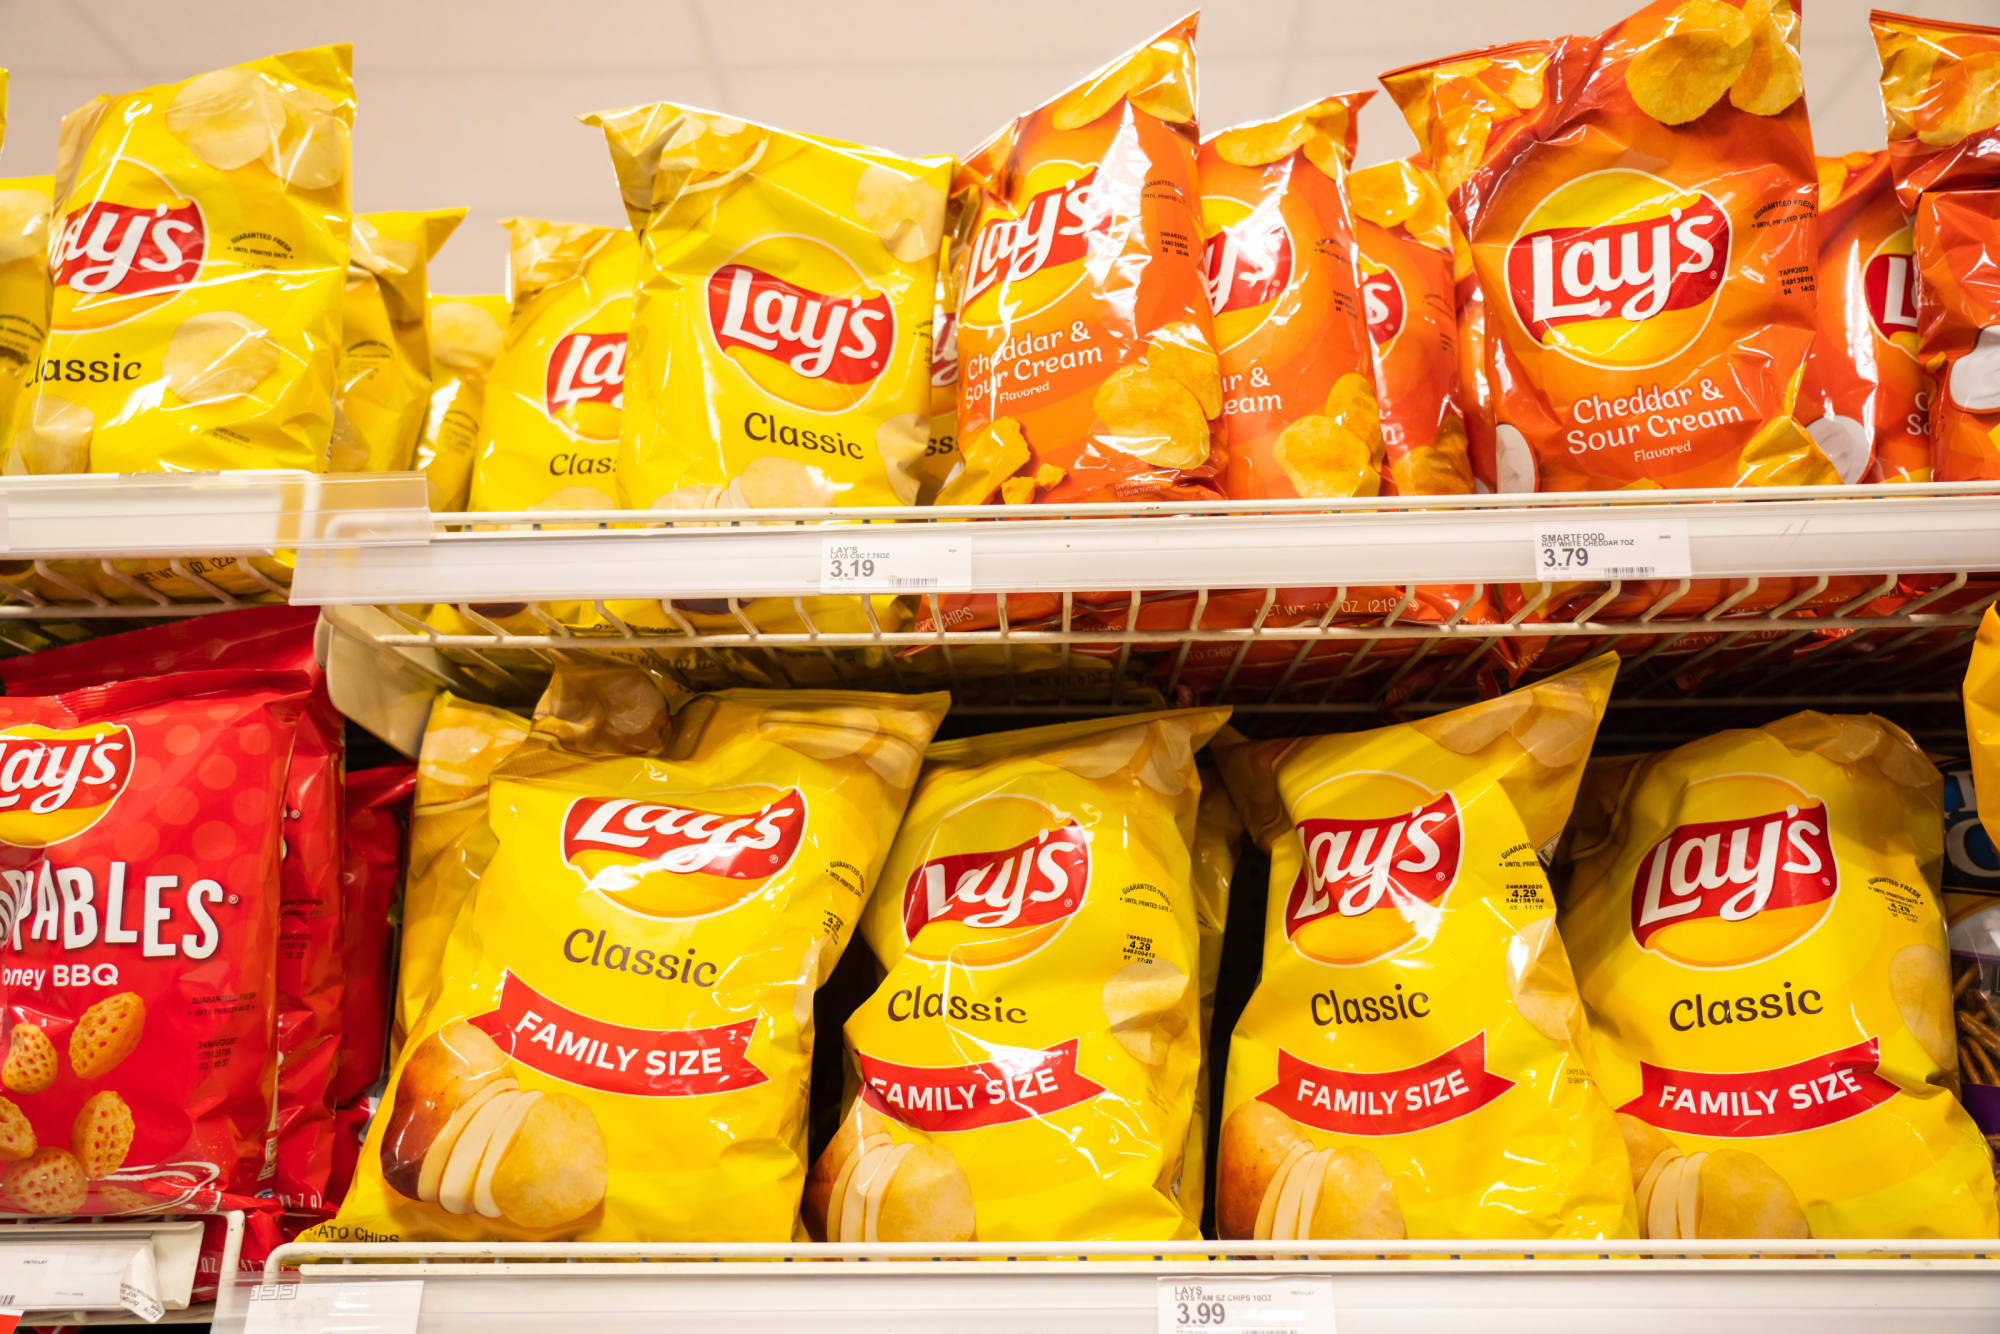 Frito-Lay says consumers crave this snacking connection